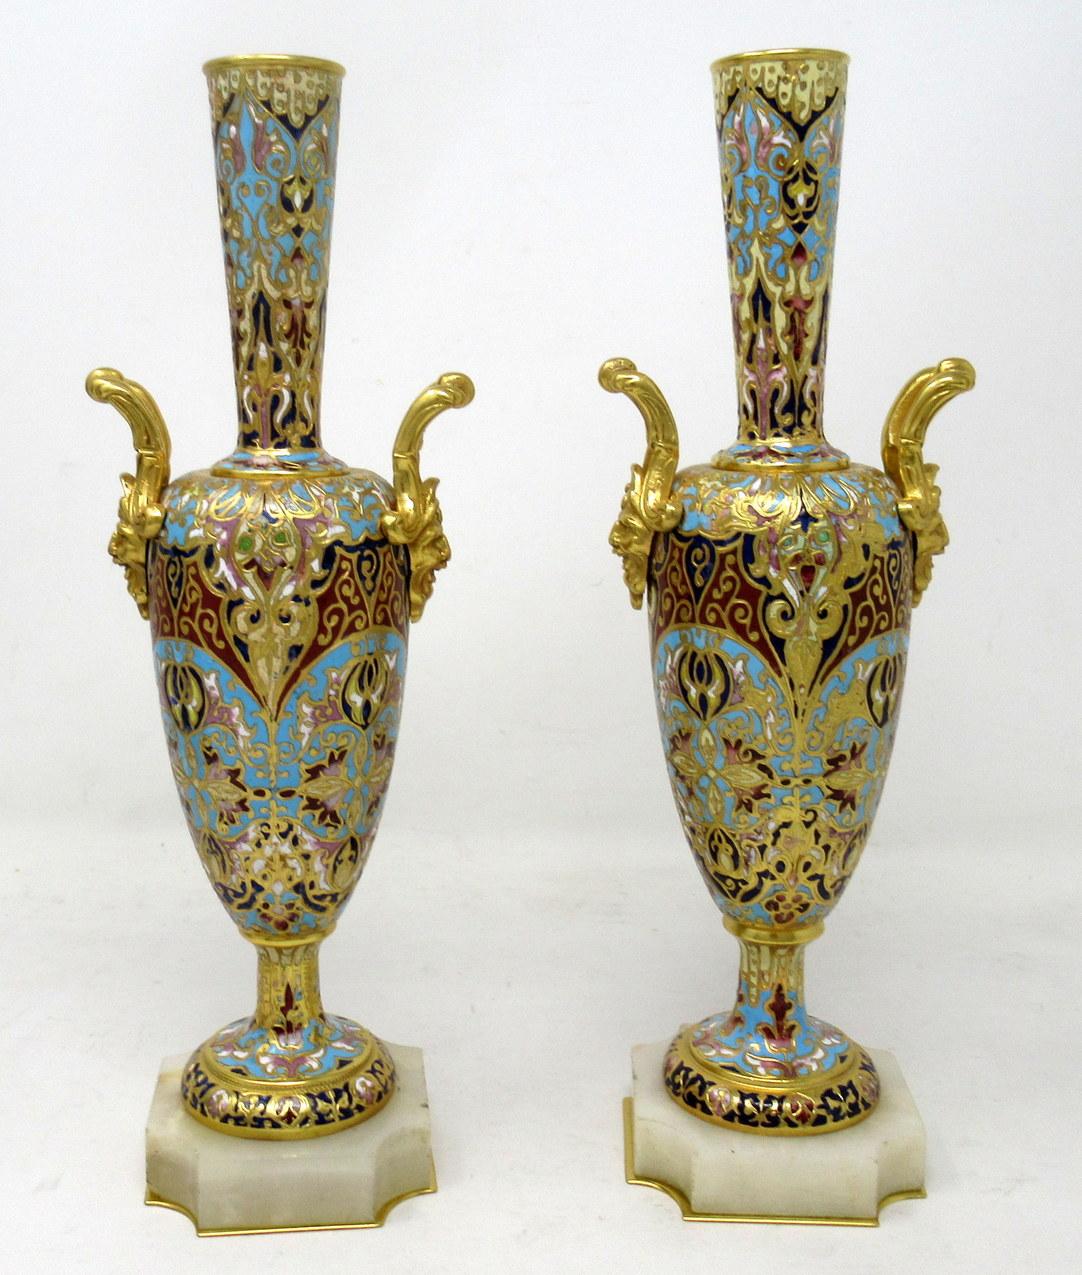 An exceptionally stylish pair of French cream Alabaster and Champleve vases of outstanding quality. Third quarter of the nineteenth century. 

This magnificent pair of vases are wrought from gilt bronze and Champleve enamel in the distinctive,